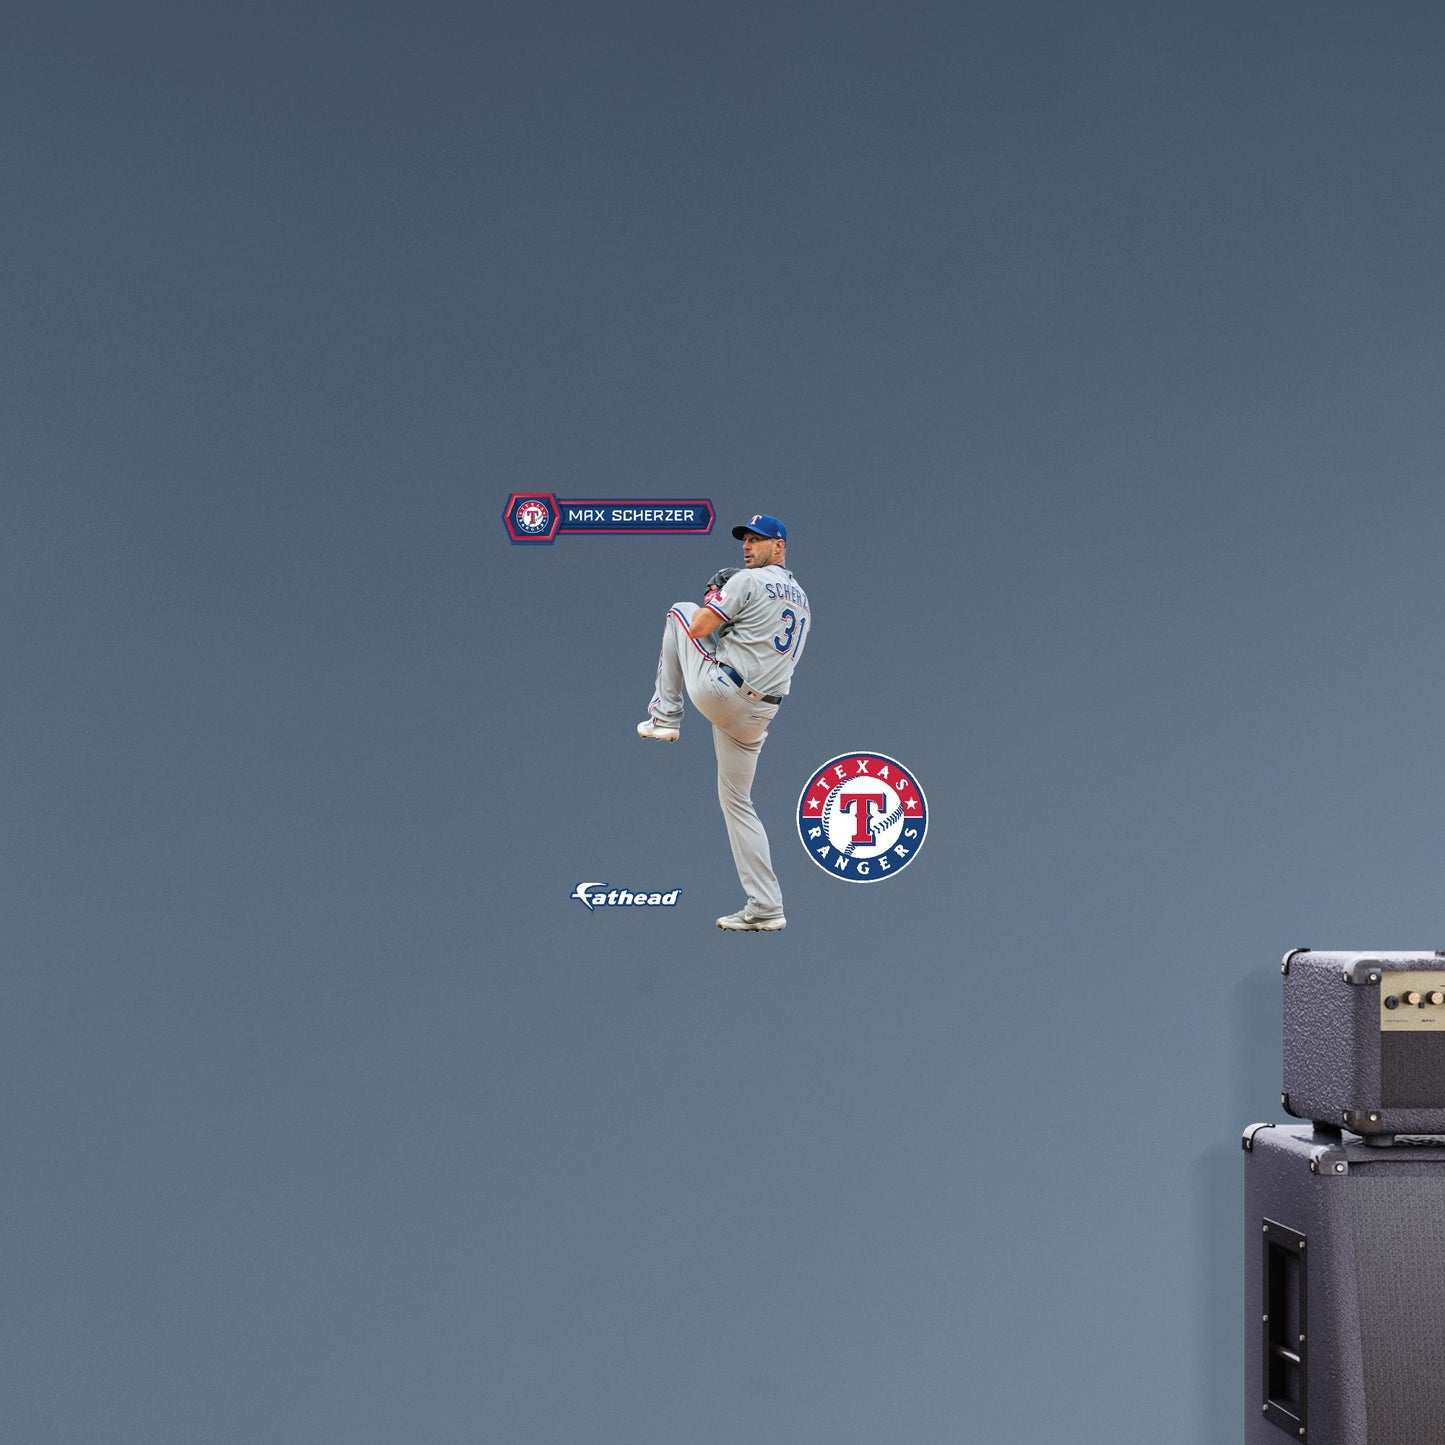 Texas Rangers: Max Scherzer         - Officially Licensed MLB Removable     Adhesive Decal